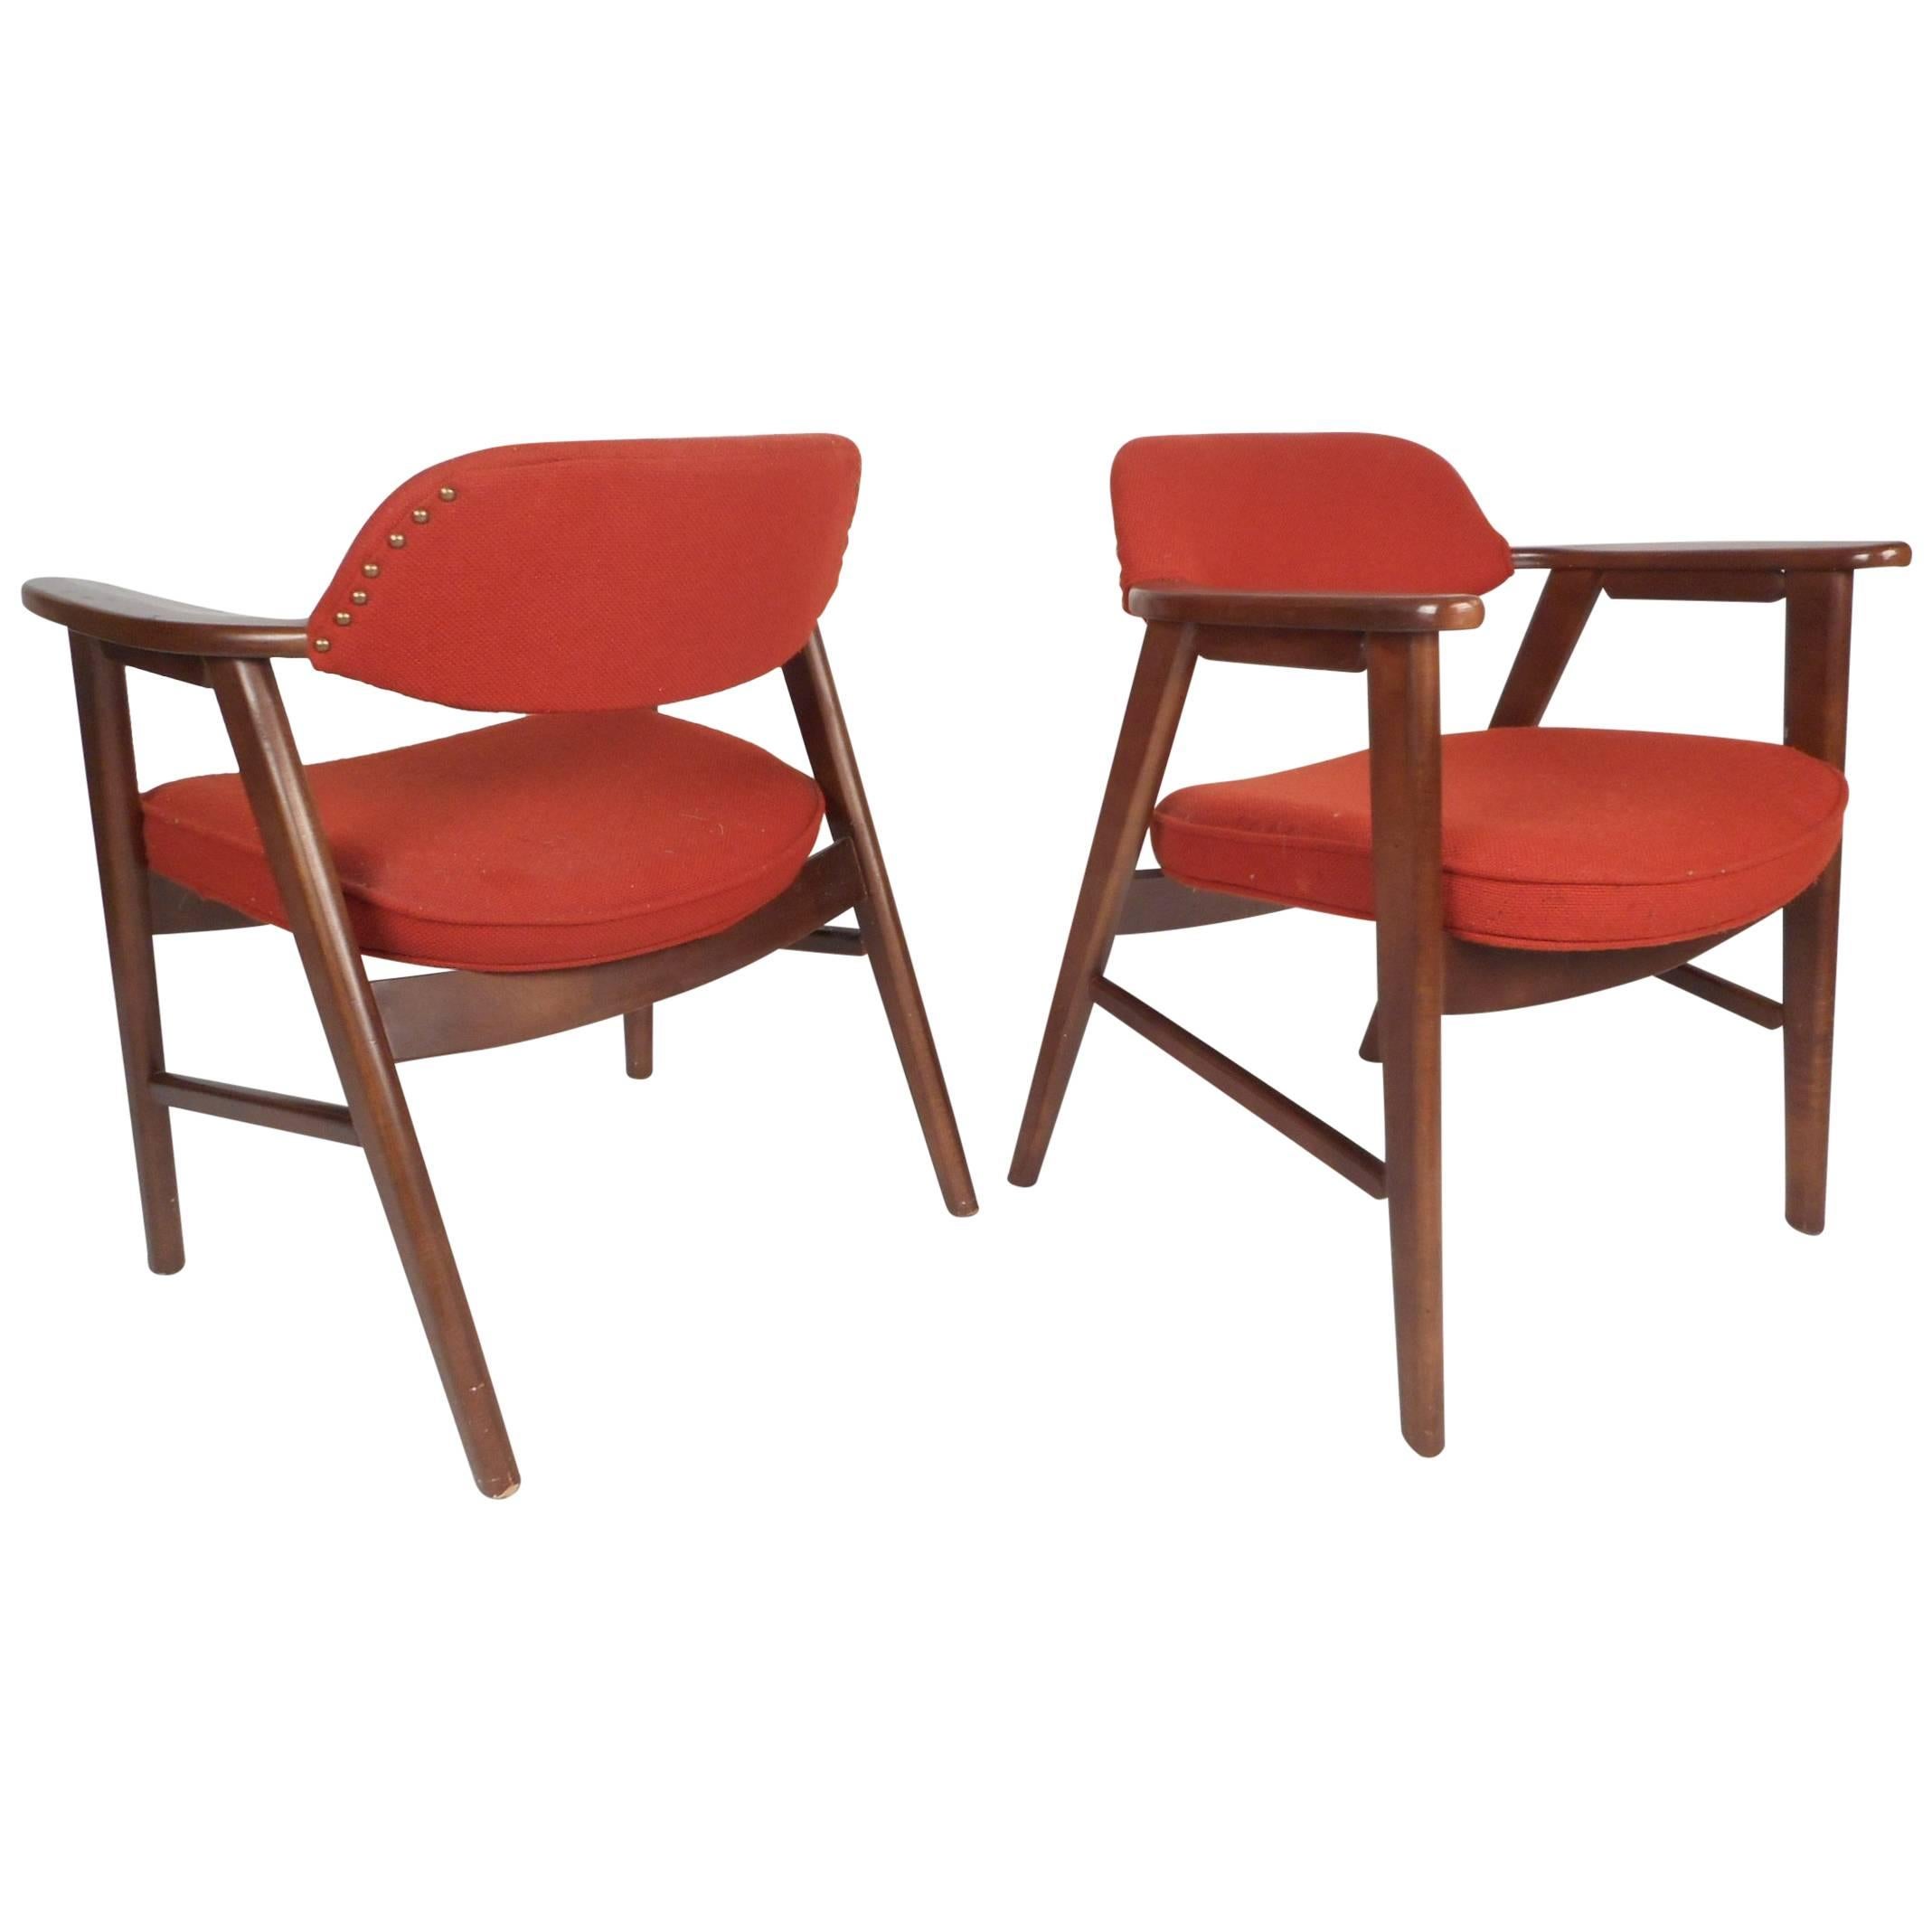 Pair of Scandinavian Modern Arm Chairs For Sale